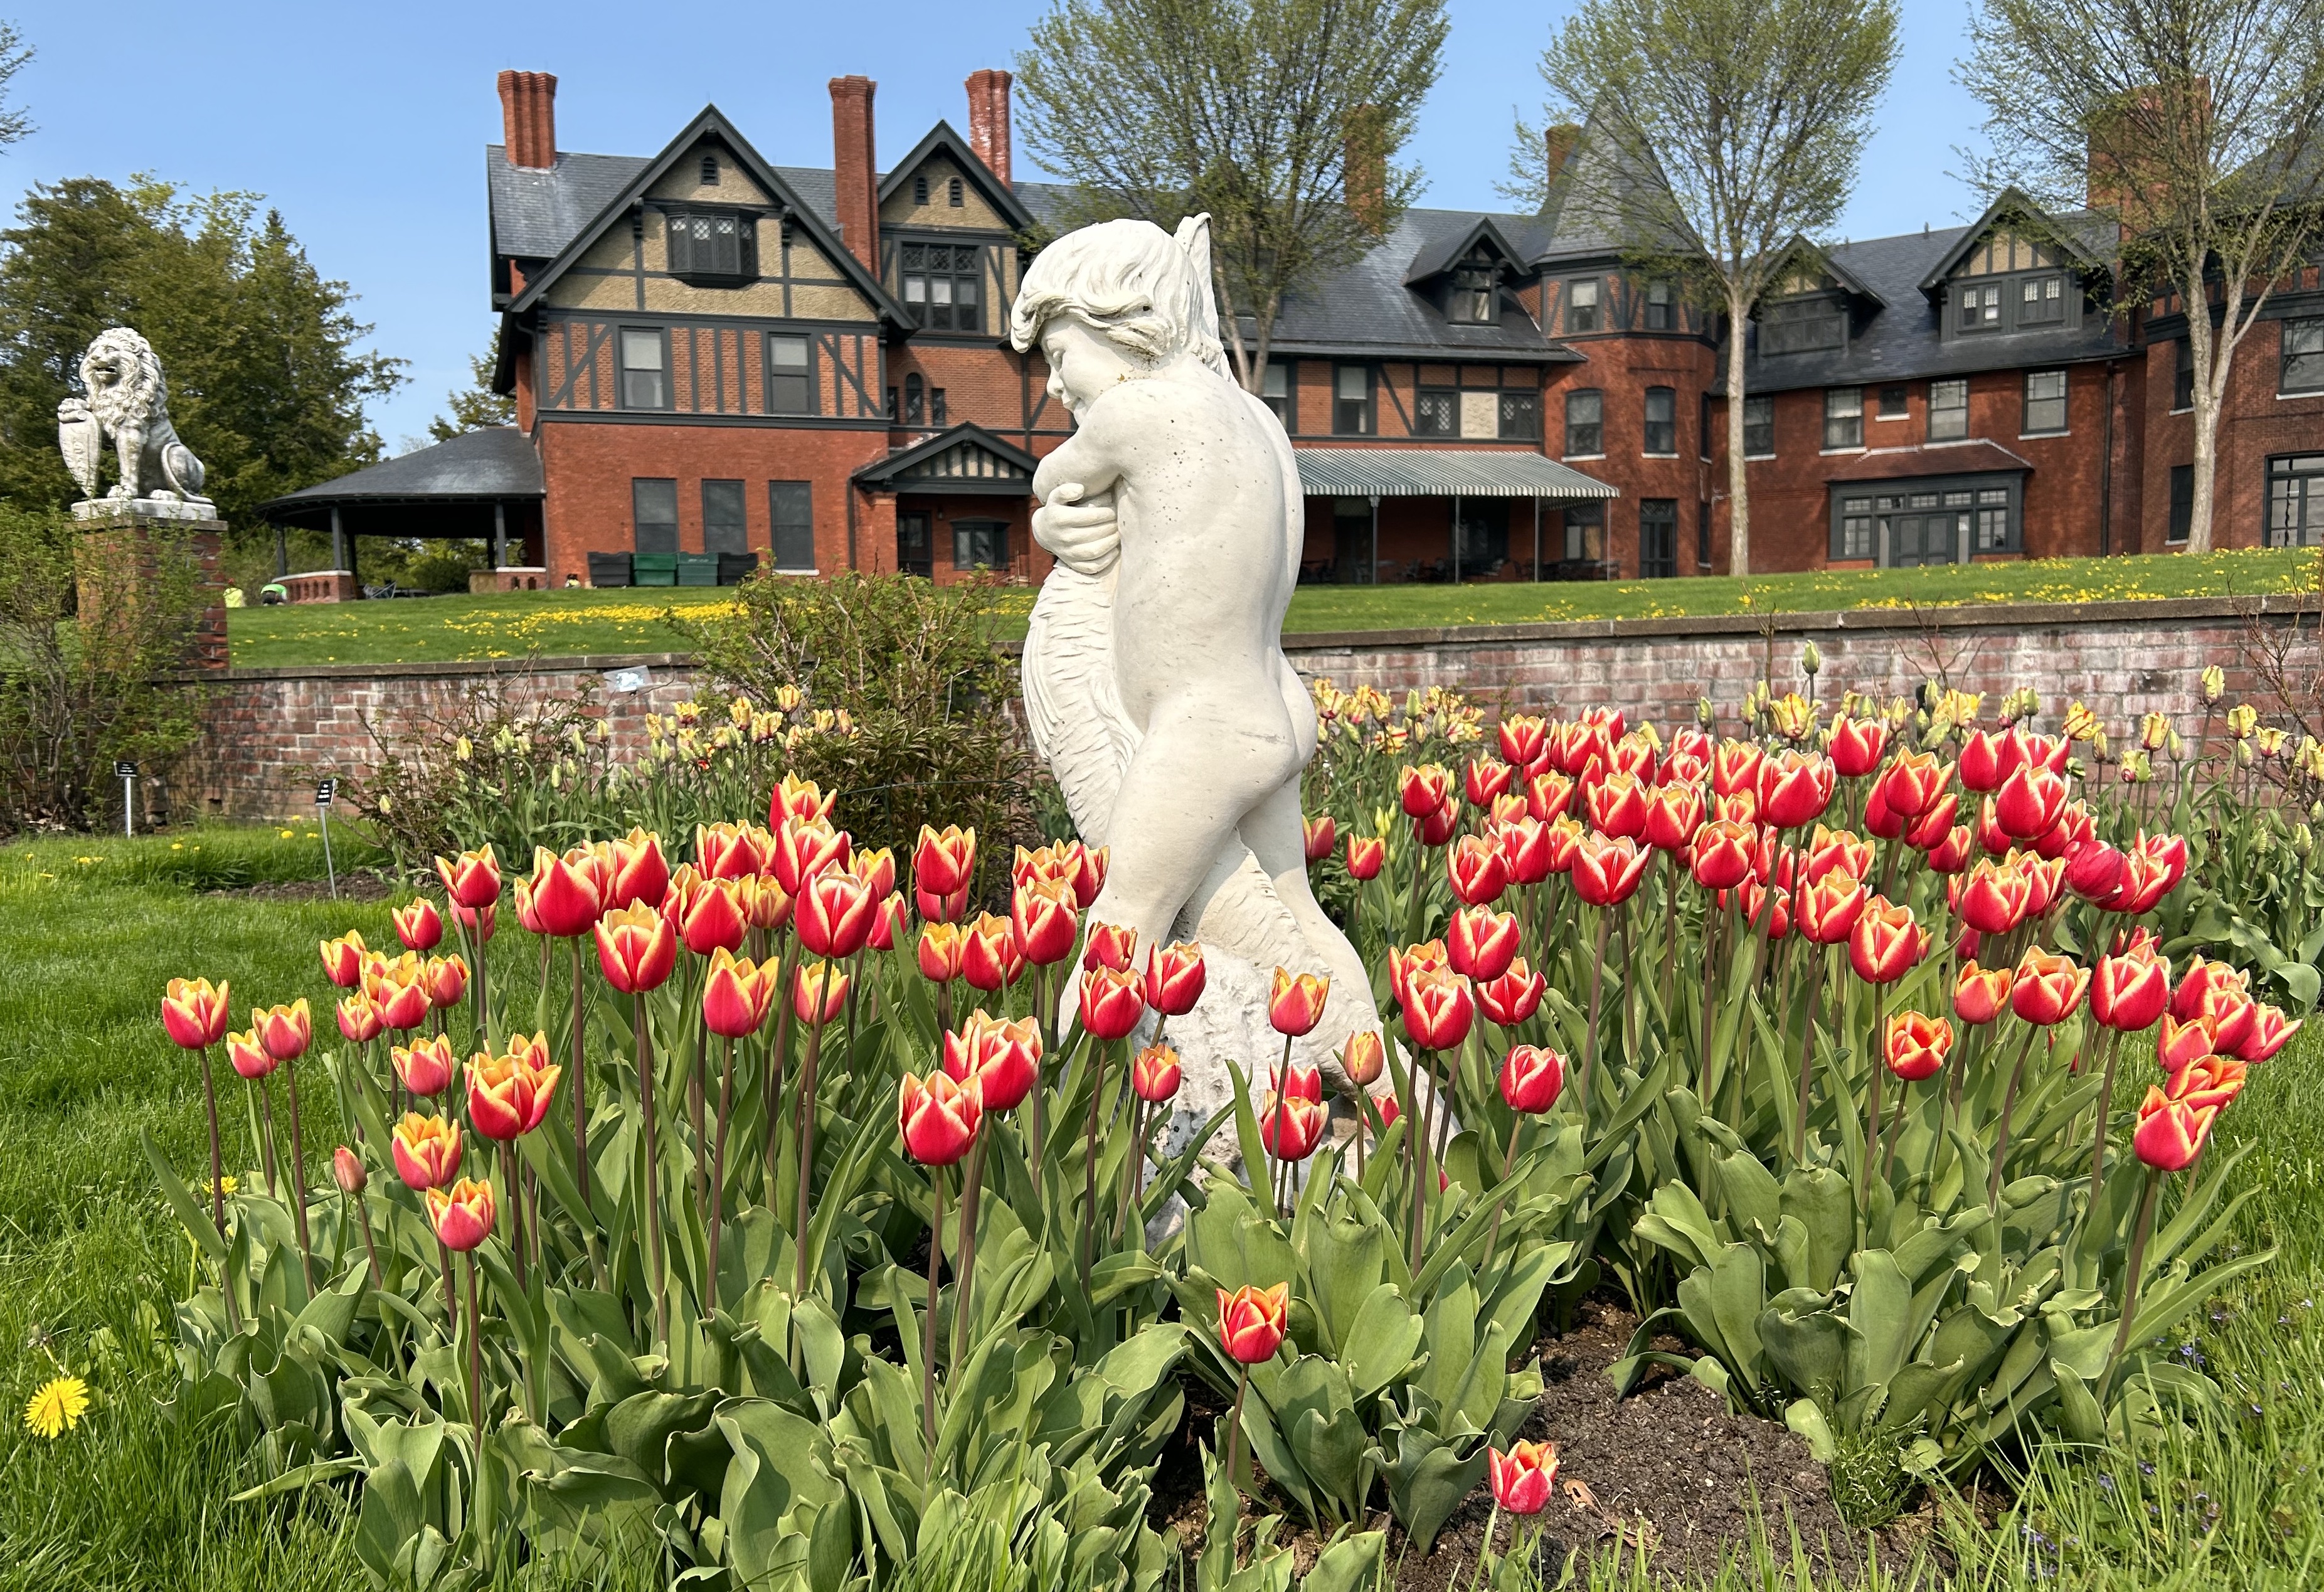 Inn with tulips and sculpture